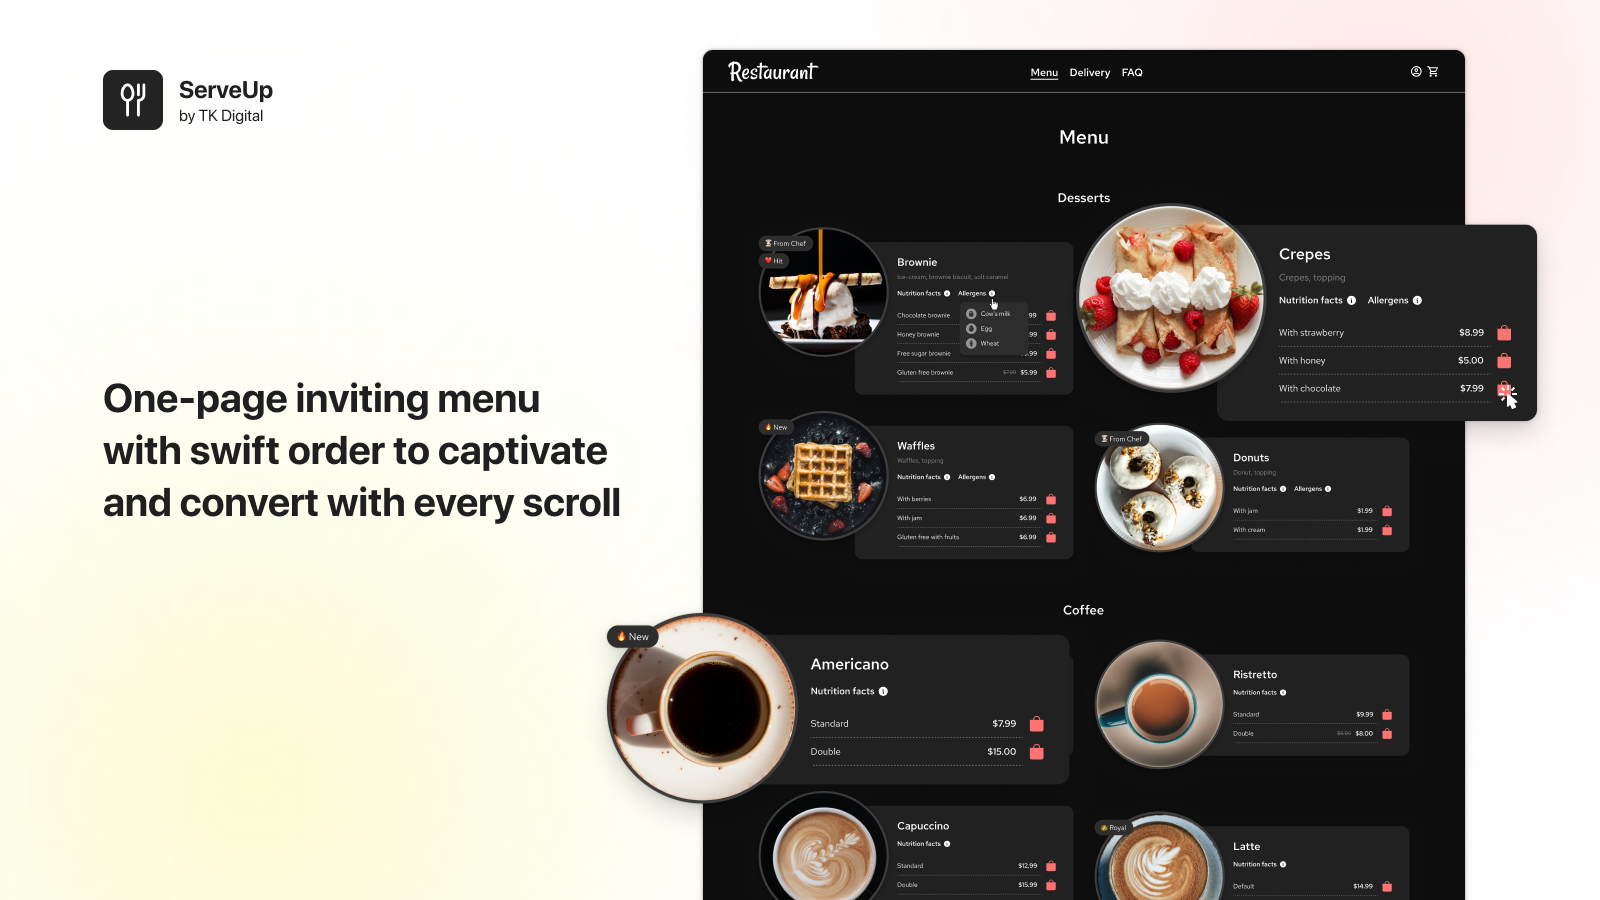 One-page inviting menu with swift order to captivate and convert